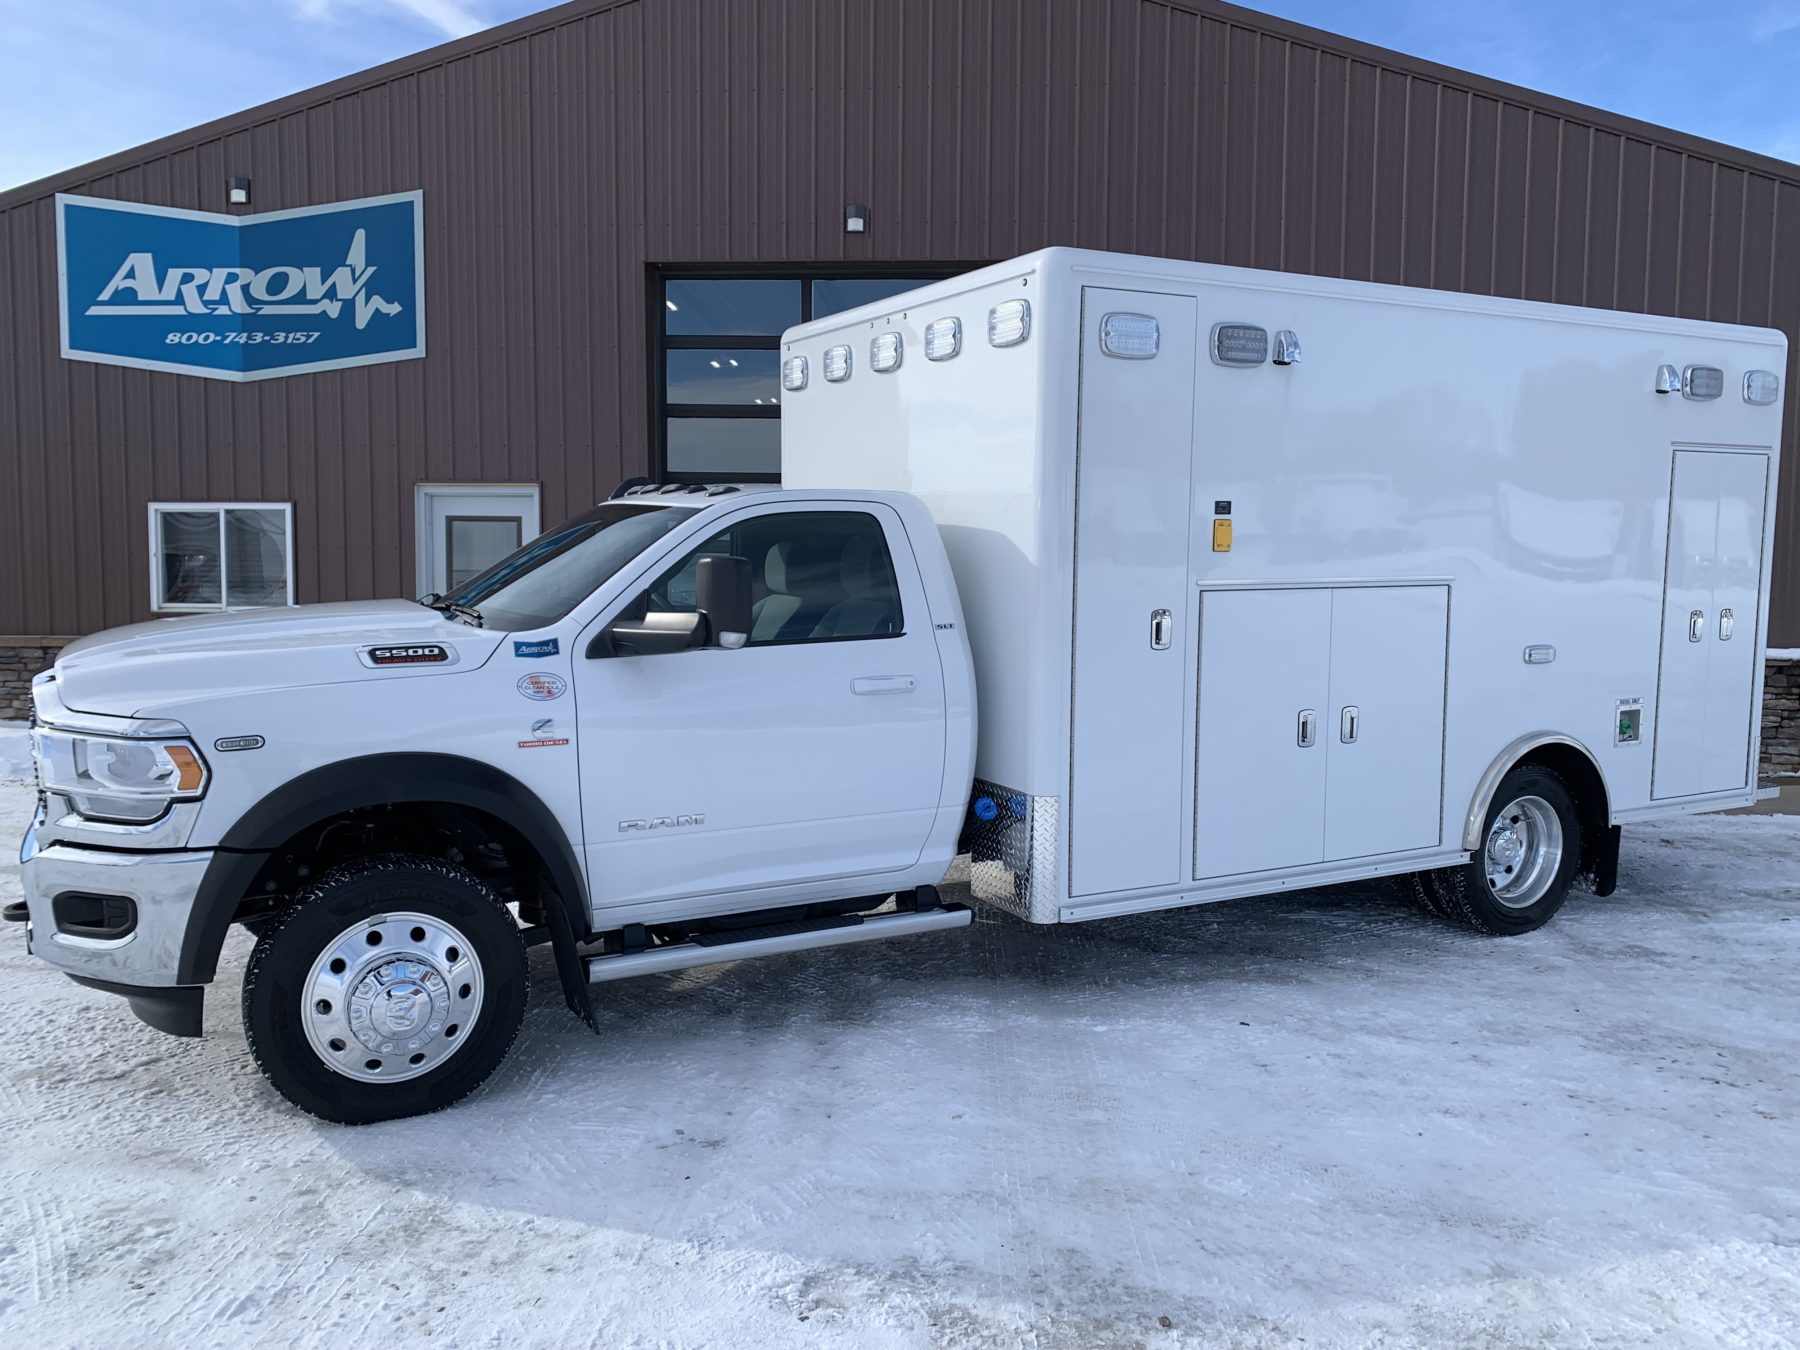 2022 Ram 5500 4x4 Heavy Duty Ambulance For Sale – Picture 3